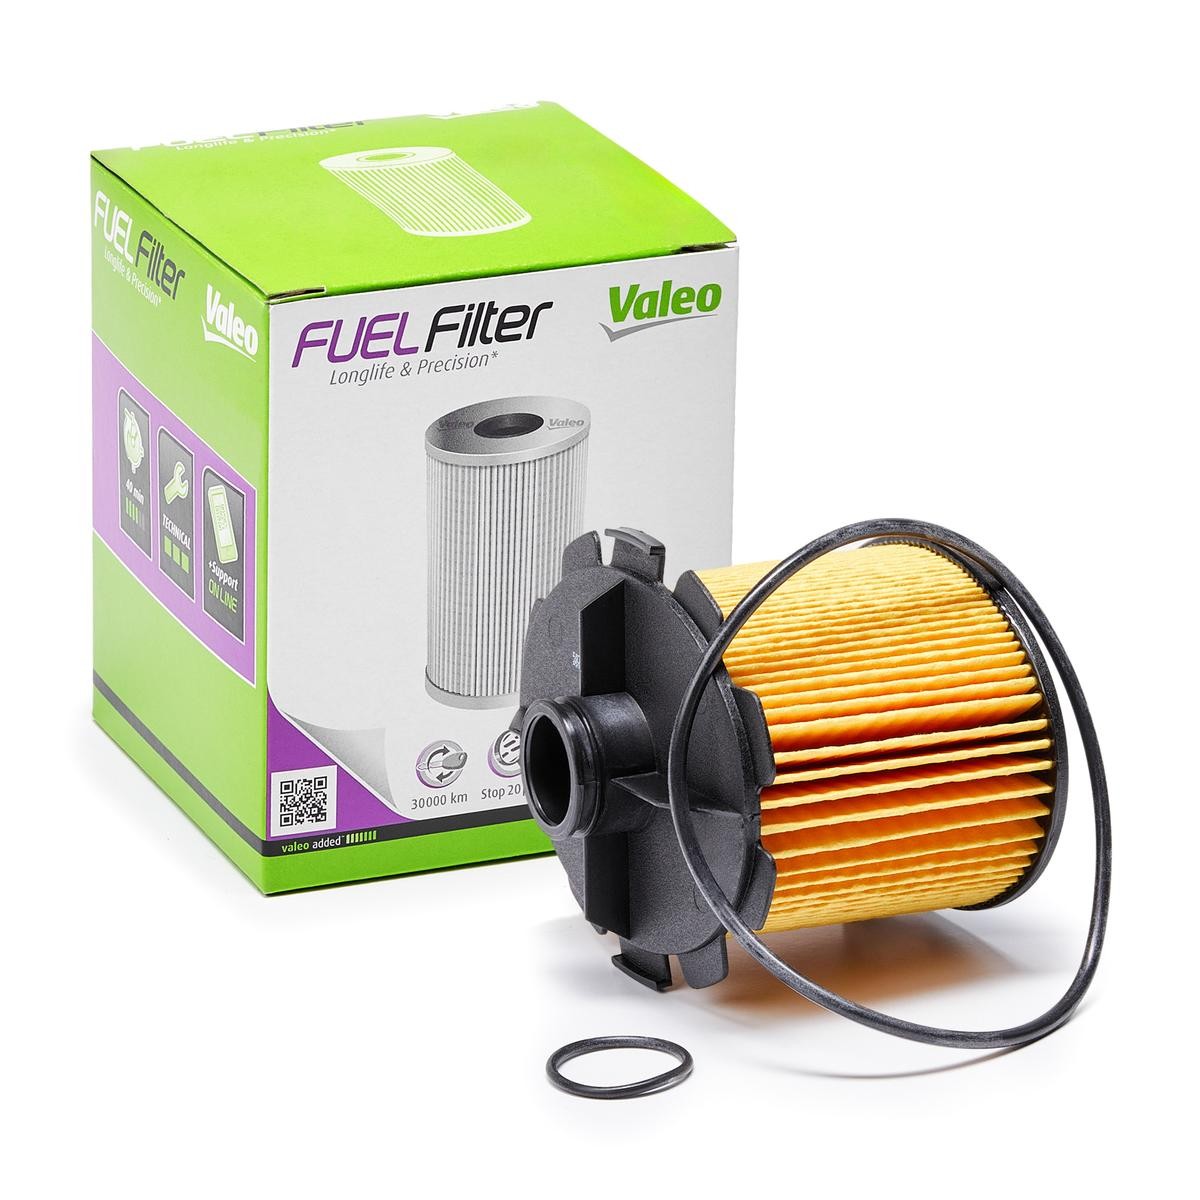 VALEO Fuel filter diesel and petrol Peugeot 206 2A/C new 587905